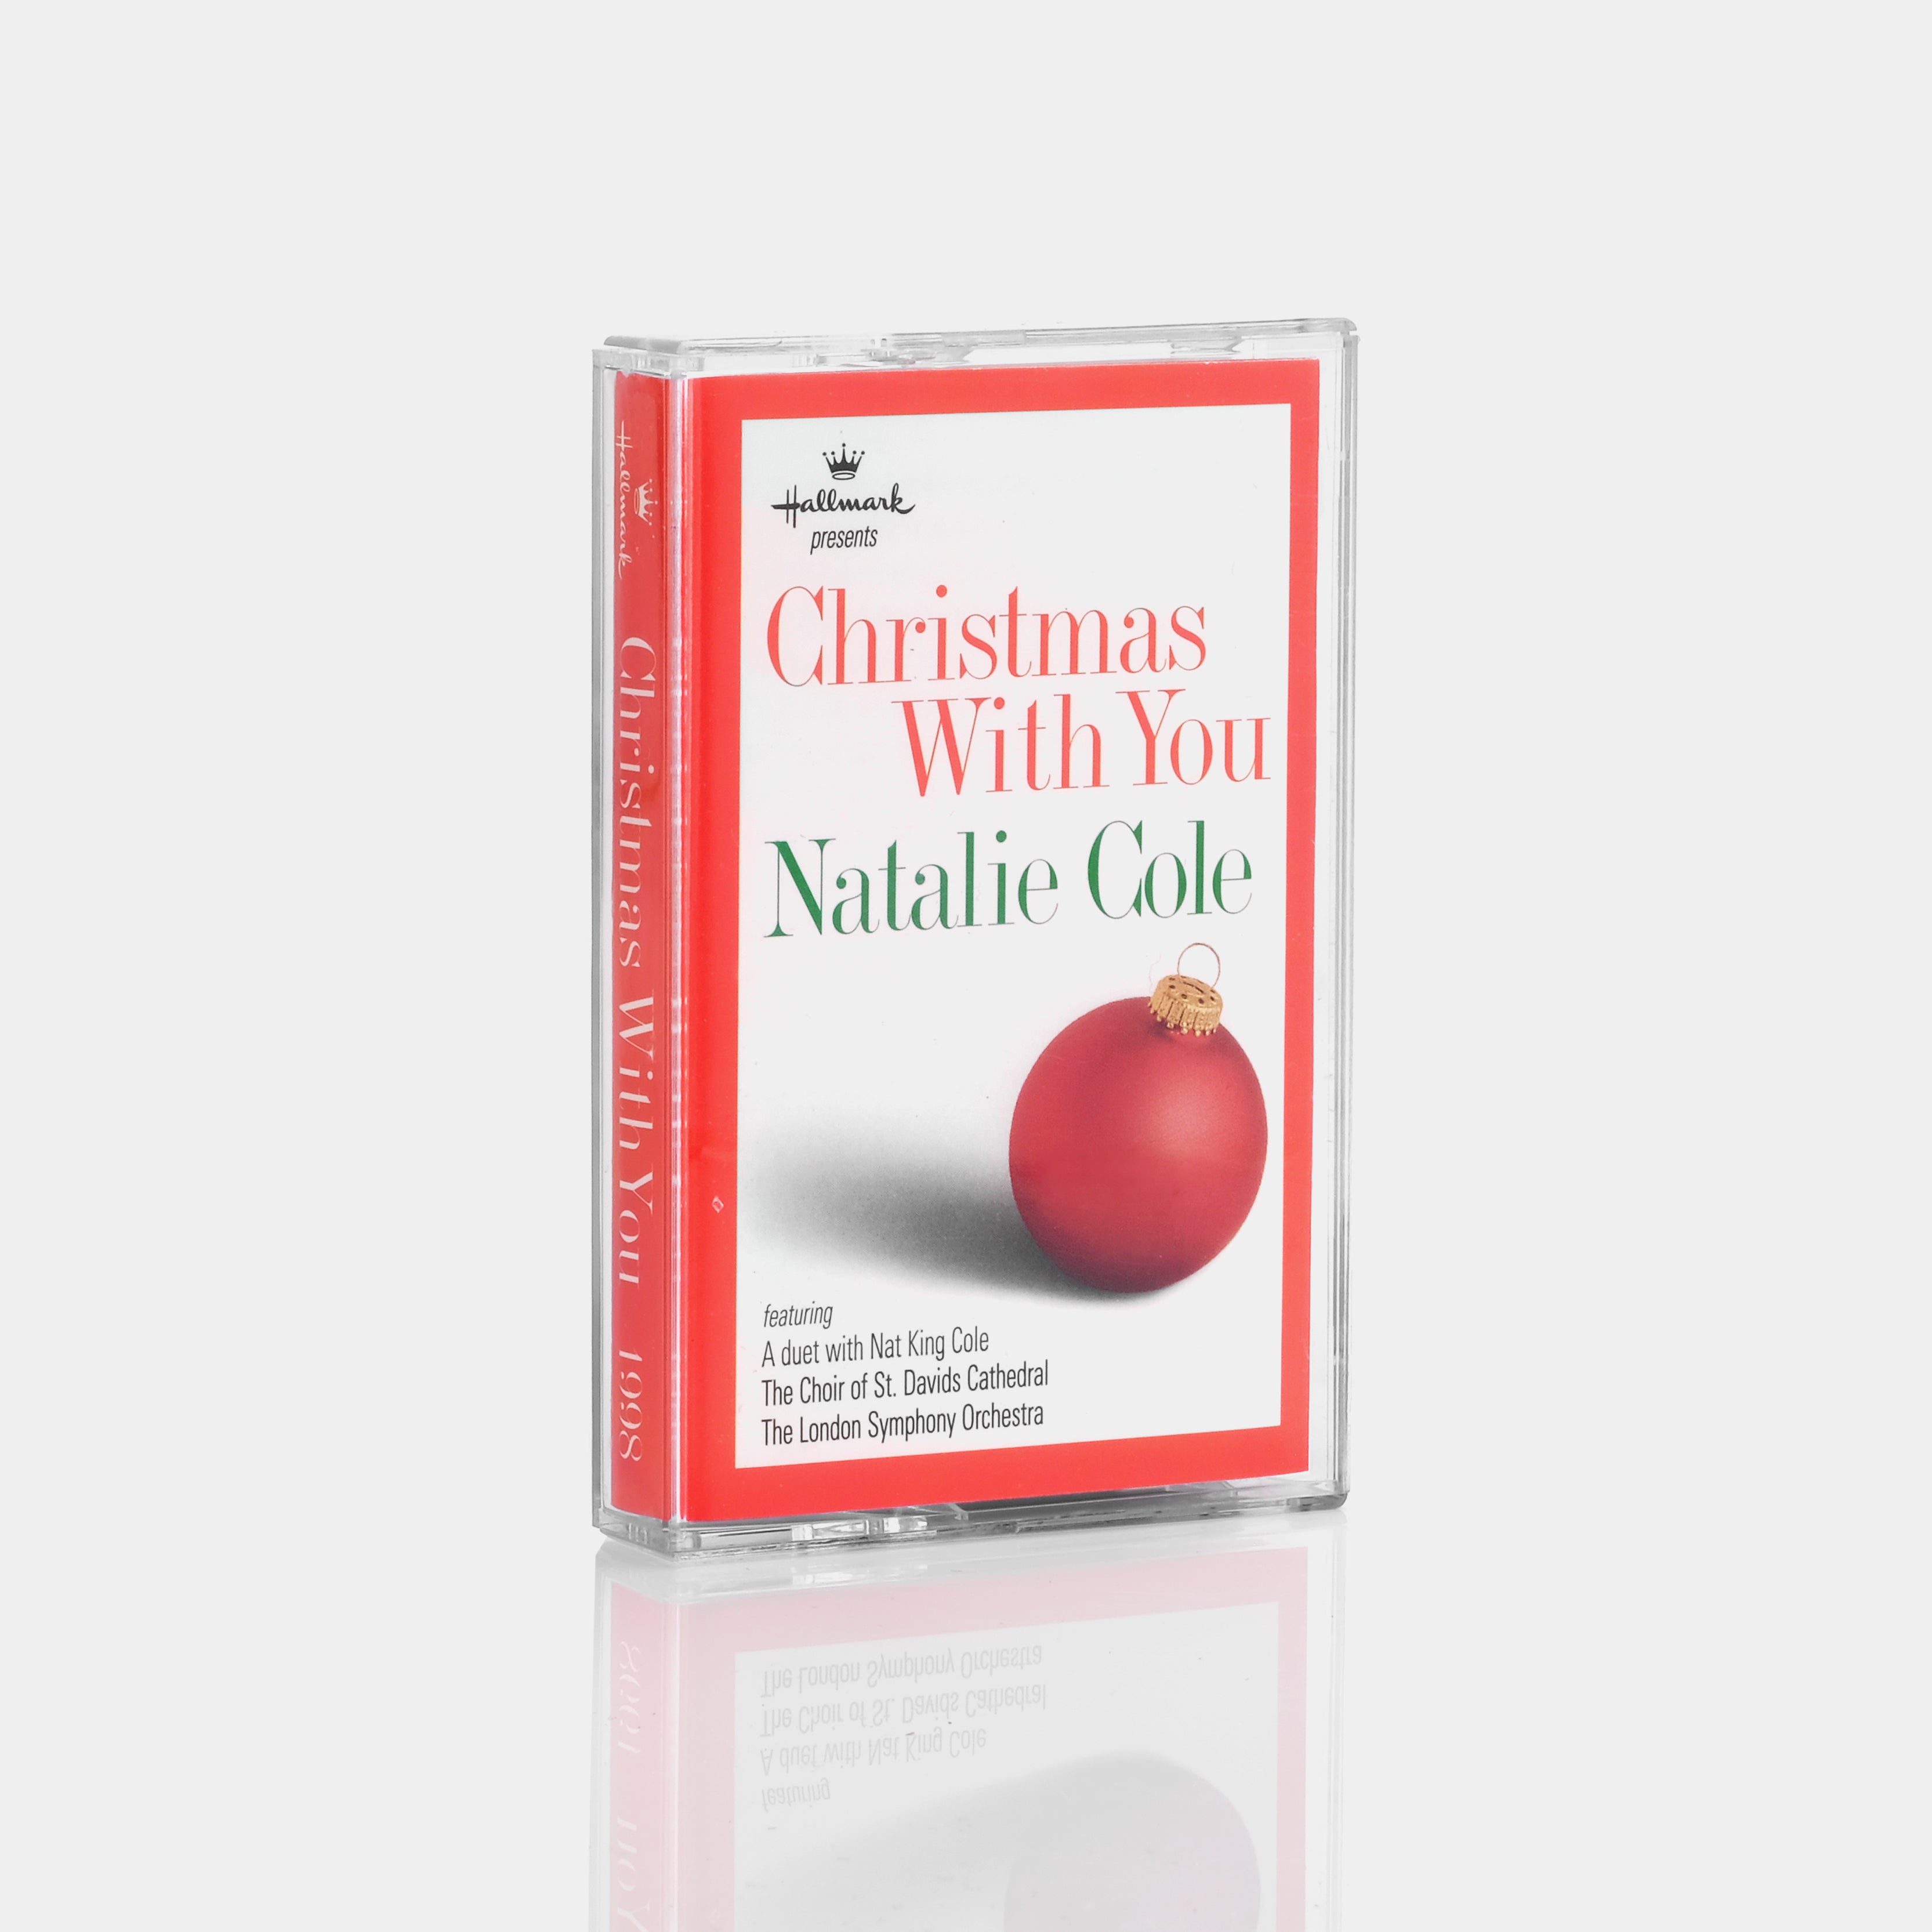 Natalie Cole - Christmas With You Cassette Tape